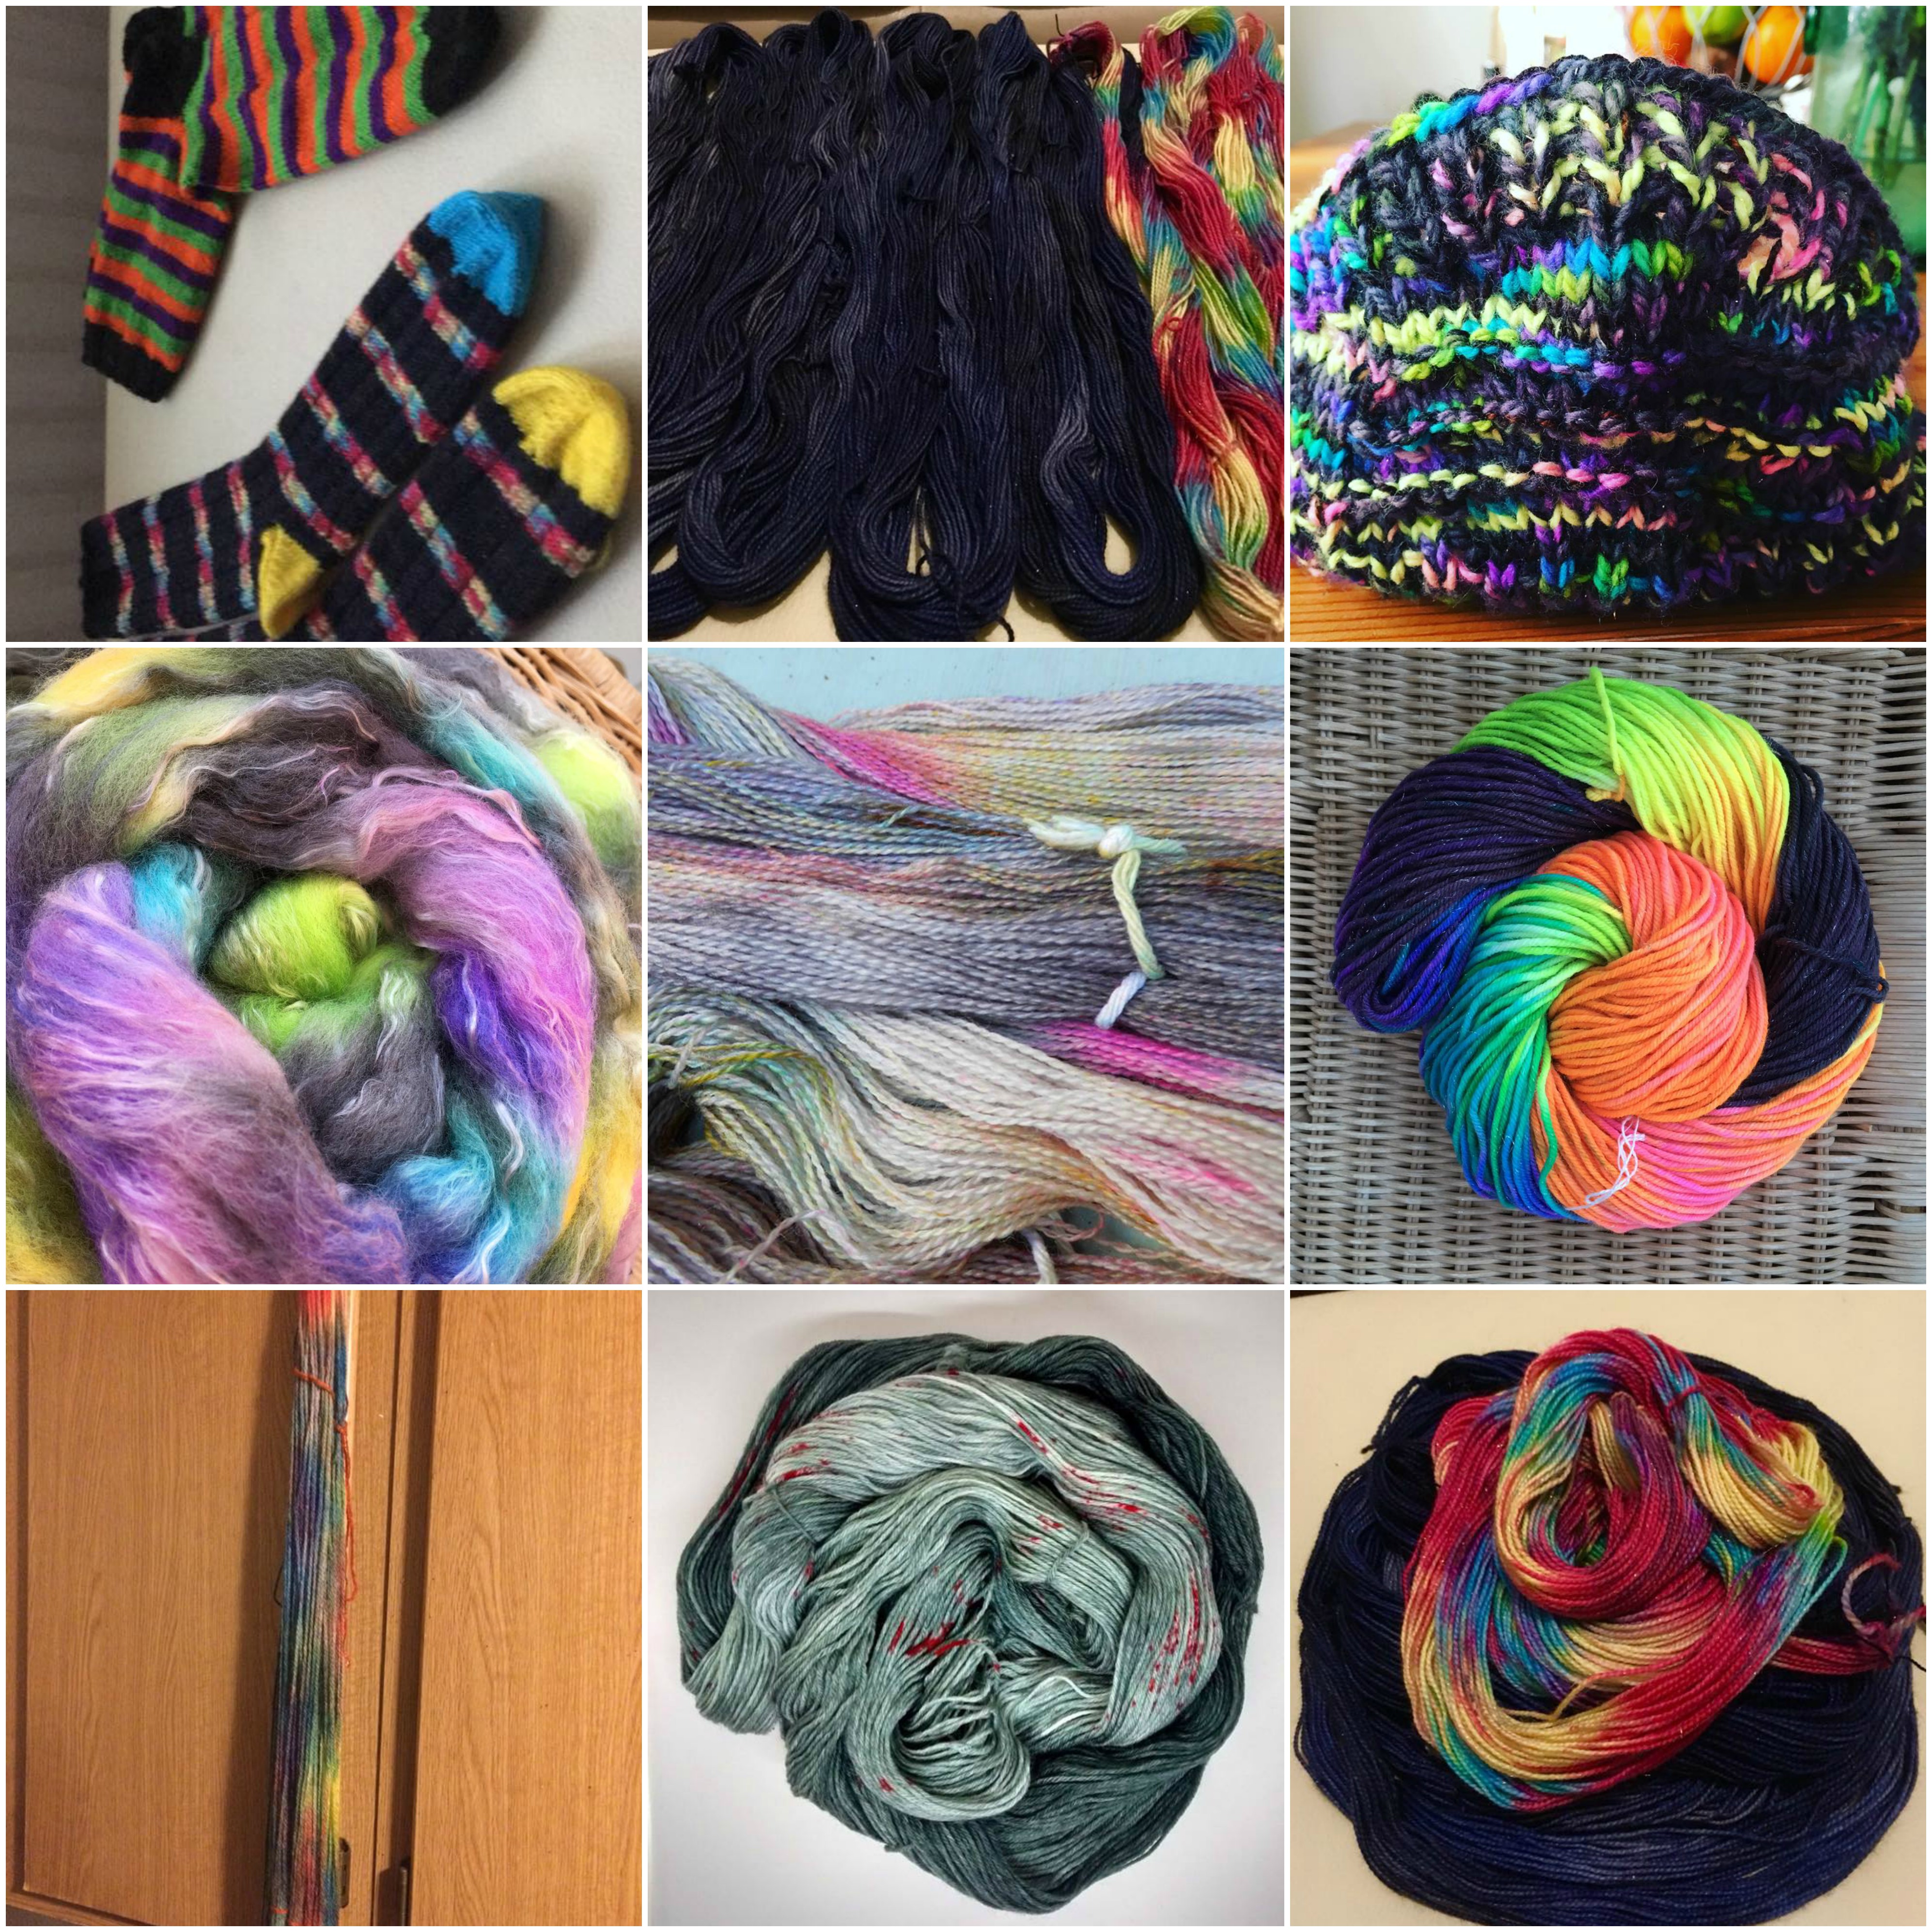 A collage of contributions for the DT Craft and Design Dye-a-Long - Nov 17 - Fireworks